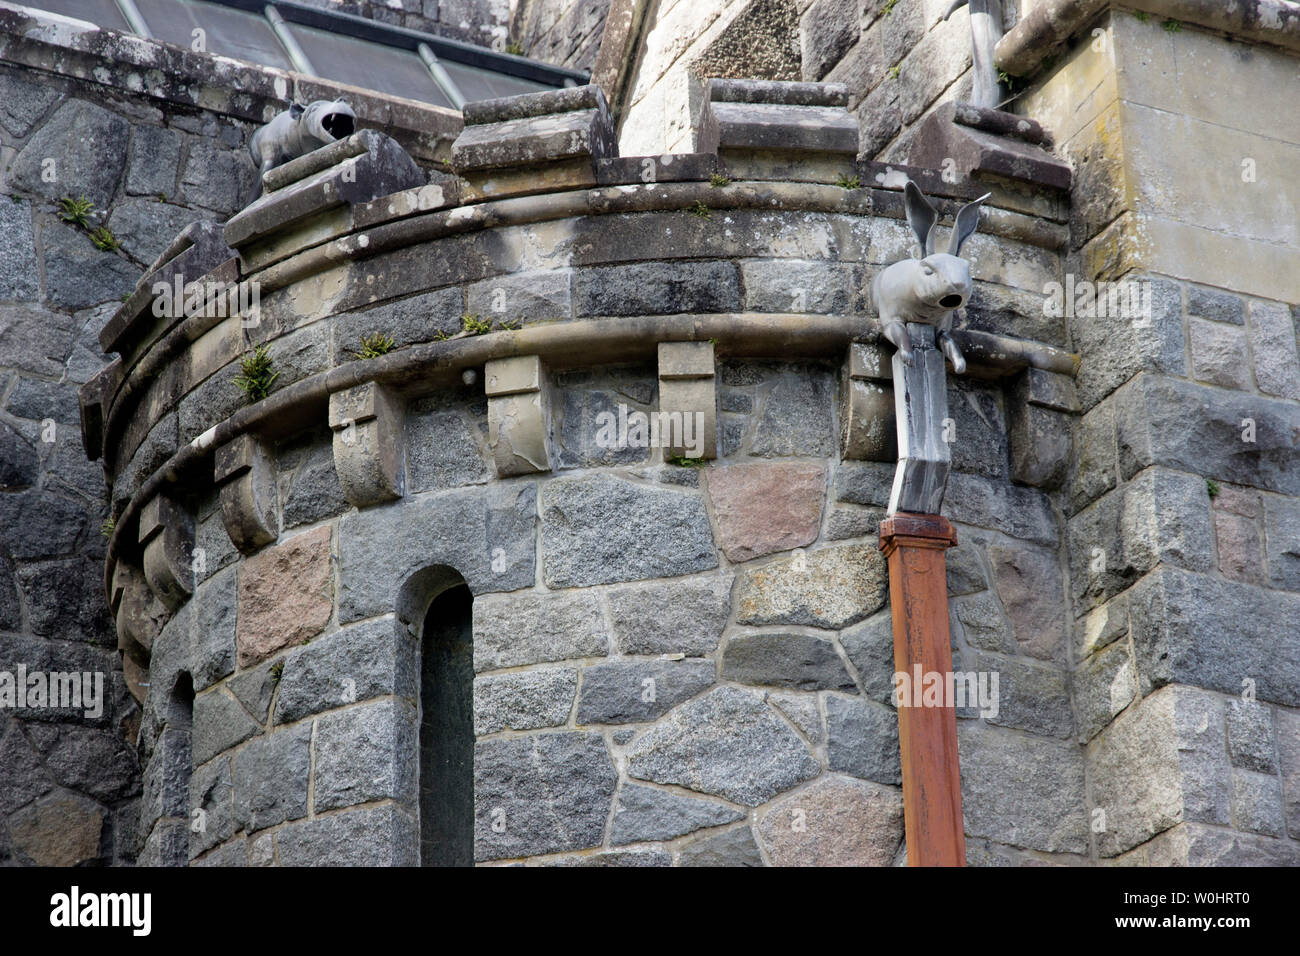 Rabbit gargoyle detail at St Conan's Kirk on the shore of Loch Awe, Argyll and Bute, Scotland. Stock Photo